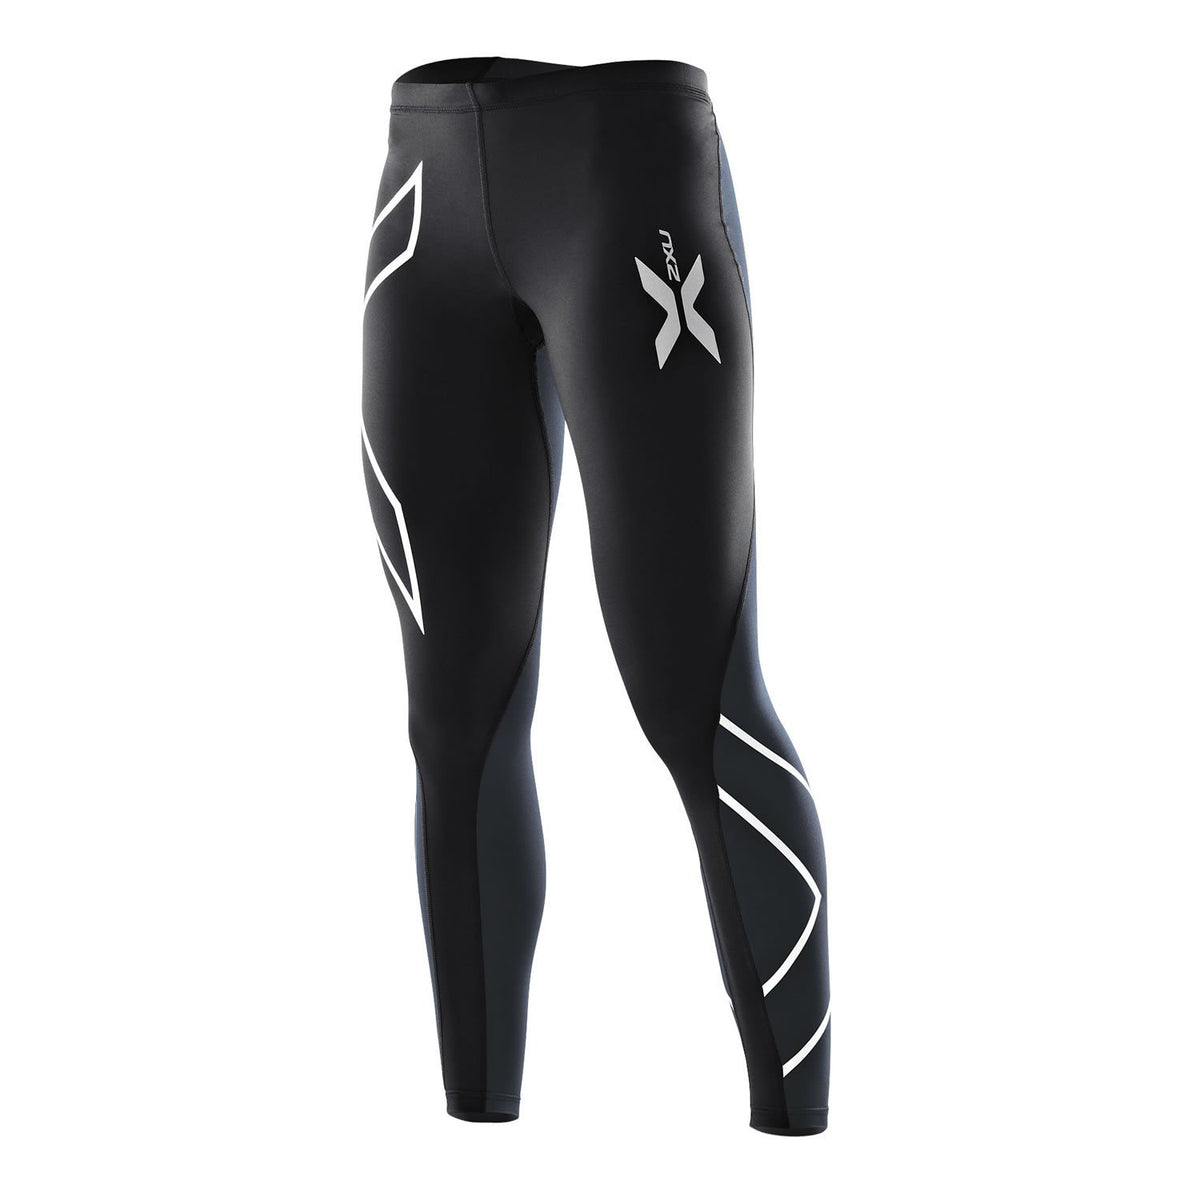 2XU Women's Power Recovery Compression Tights, Small Only